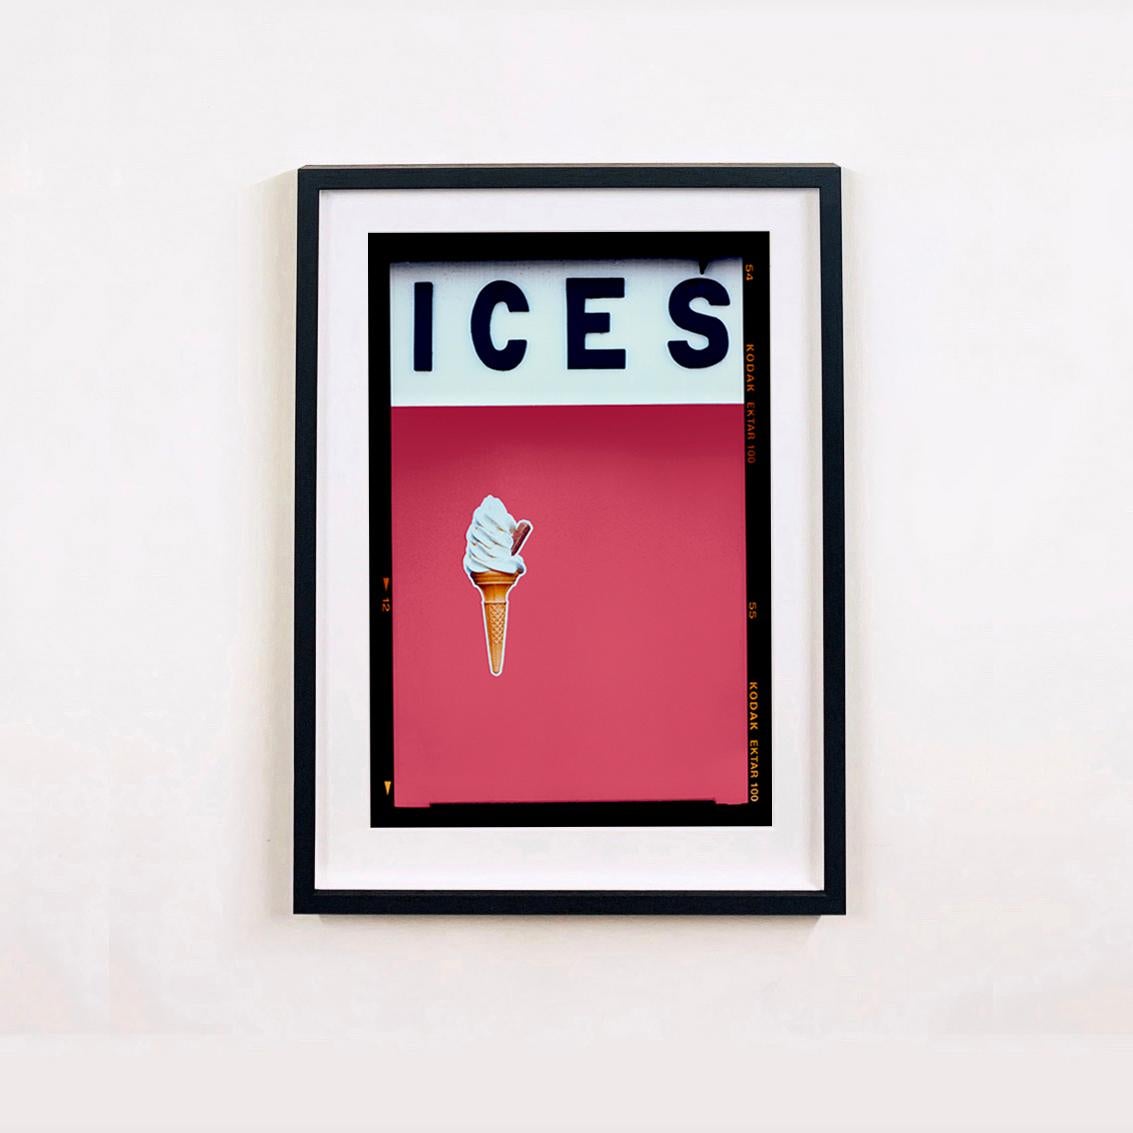 Ices (Raspberry), Bexhill-on-Sea - British seaside color photography - Print by Richard Heeps